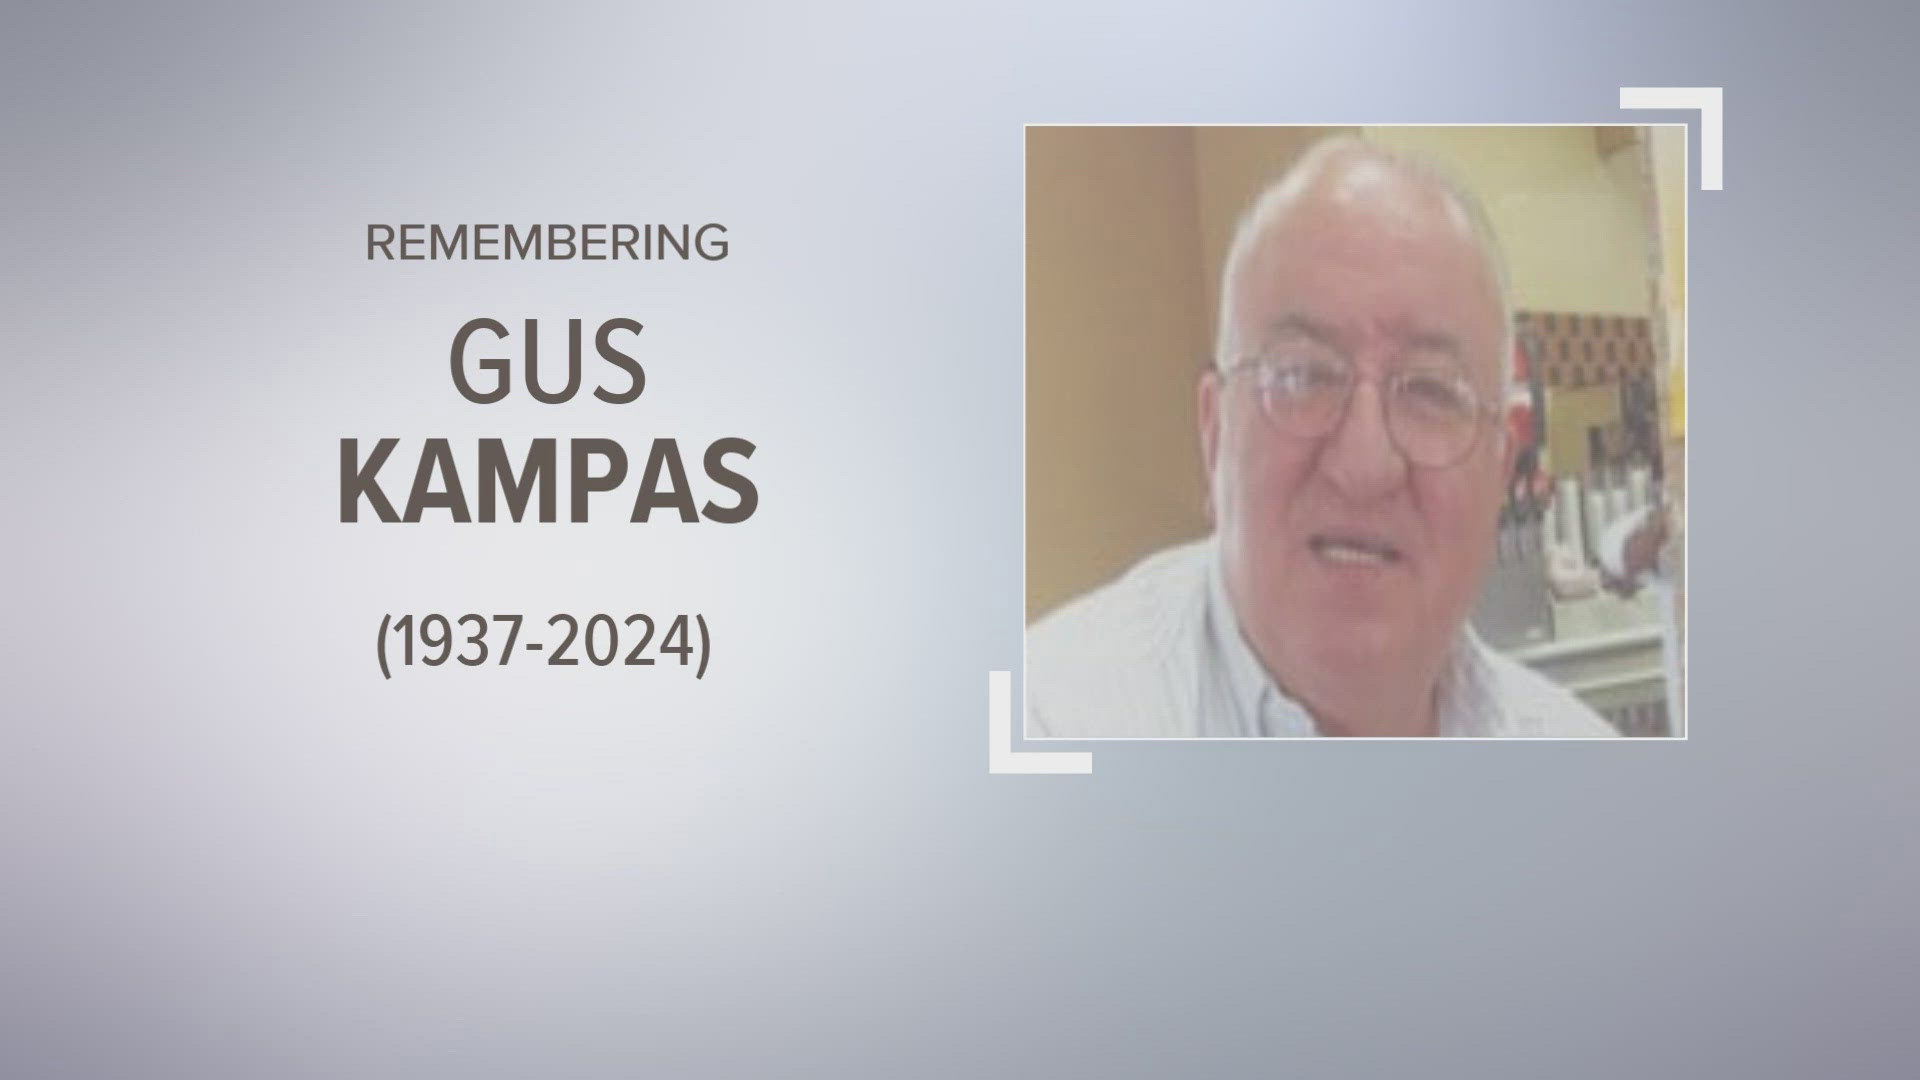 Gus Kampas immigrated to the U.S. in 1950, arriving at Ellis Island and navigating customs at 13 years old. The Varsity Inn closed in 2012.